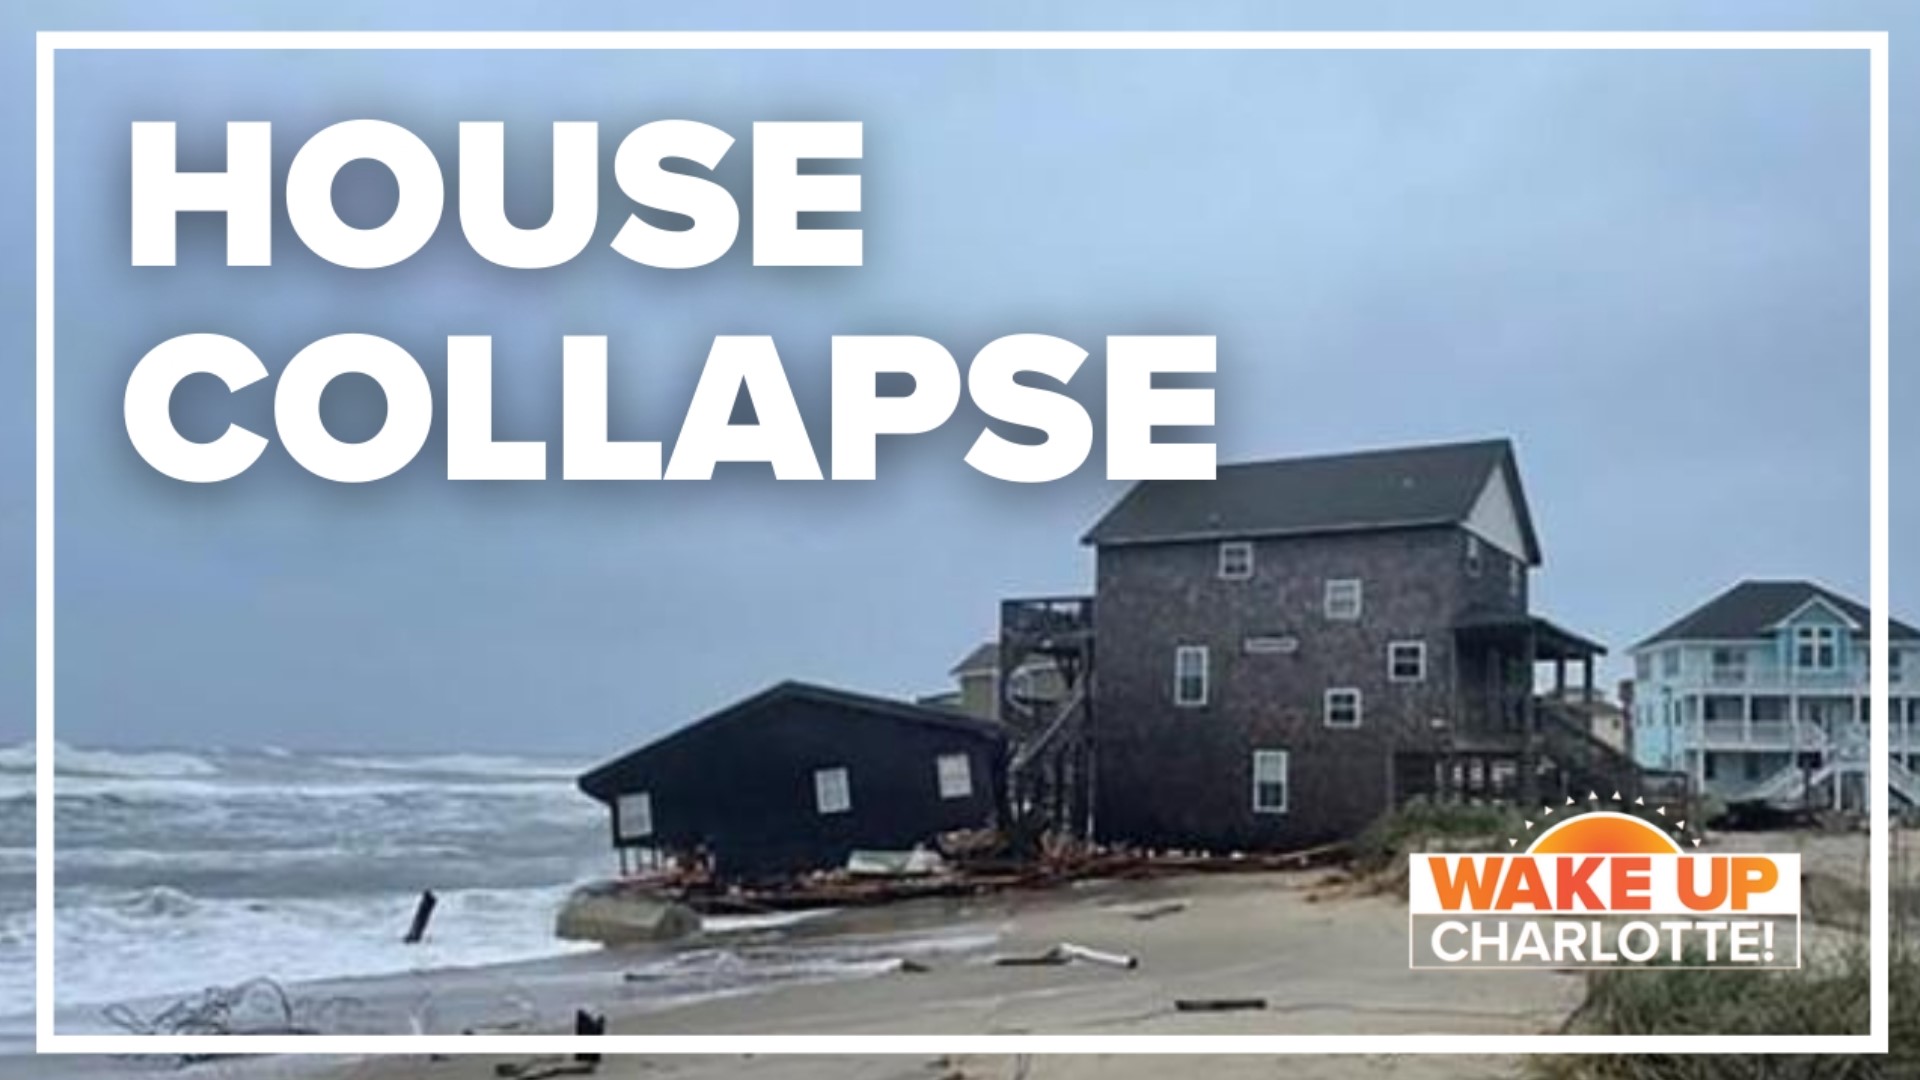 While the Outer Banks experiences beach erosion, rip currents and overwash from a nor'easter along the coast, a seaside house in Rodanthe collapsed Tuesday.